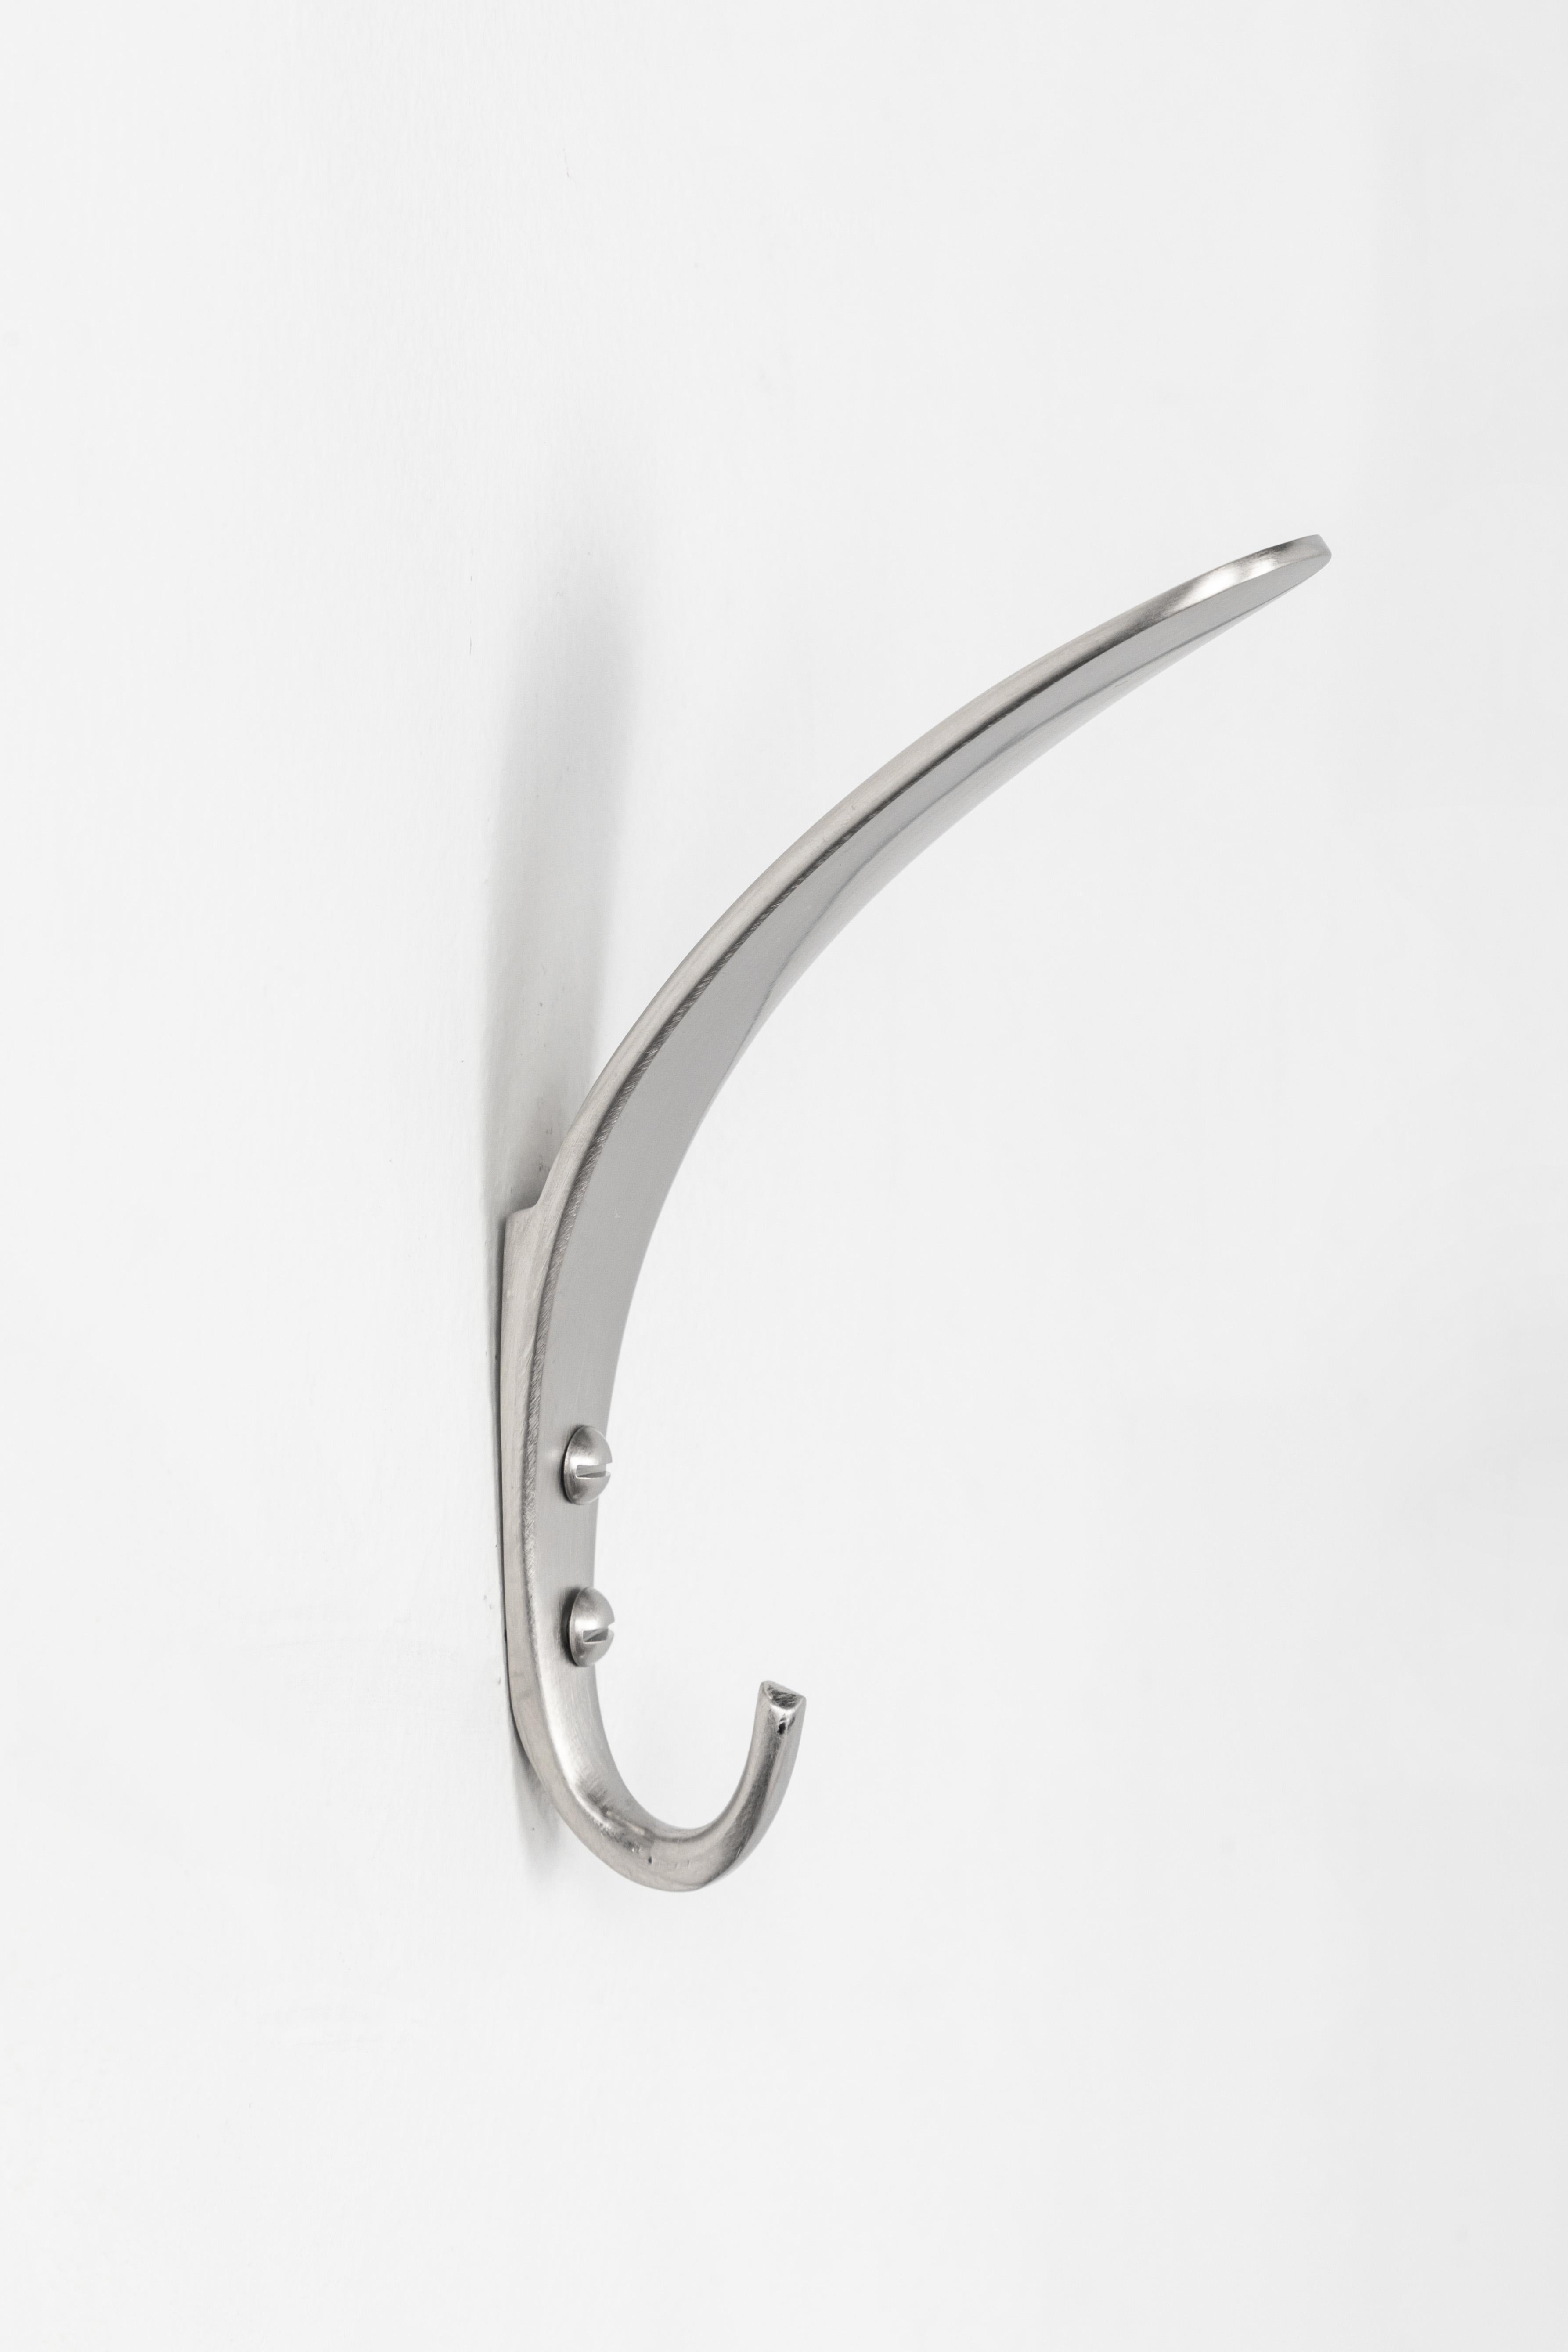 Contemporary Carl Auböck Model #4327 Nickel-Plated Hook For Sale